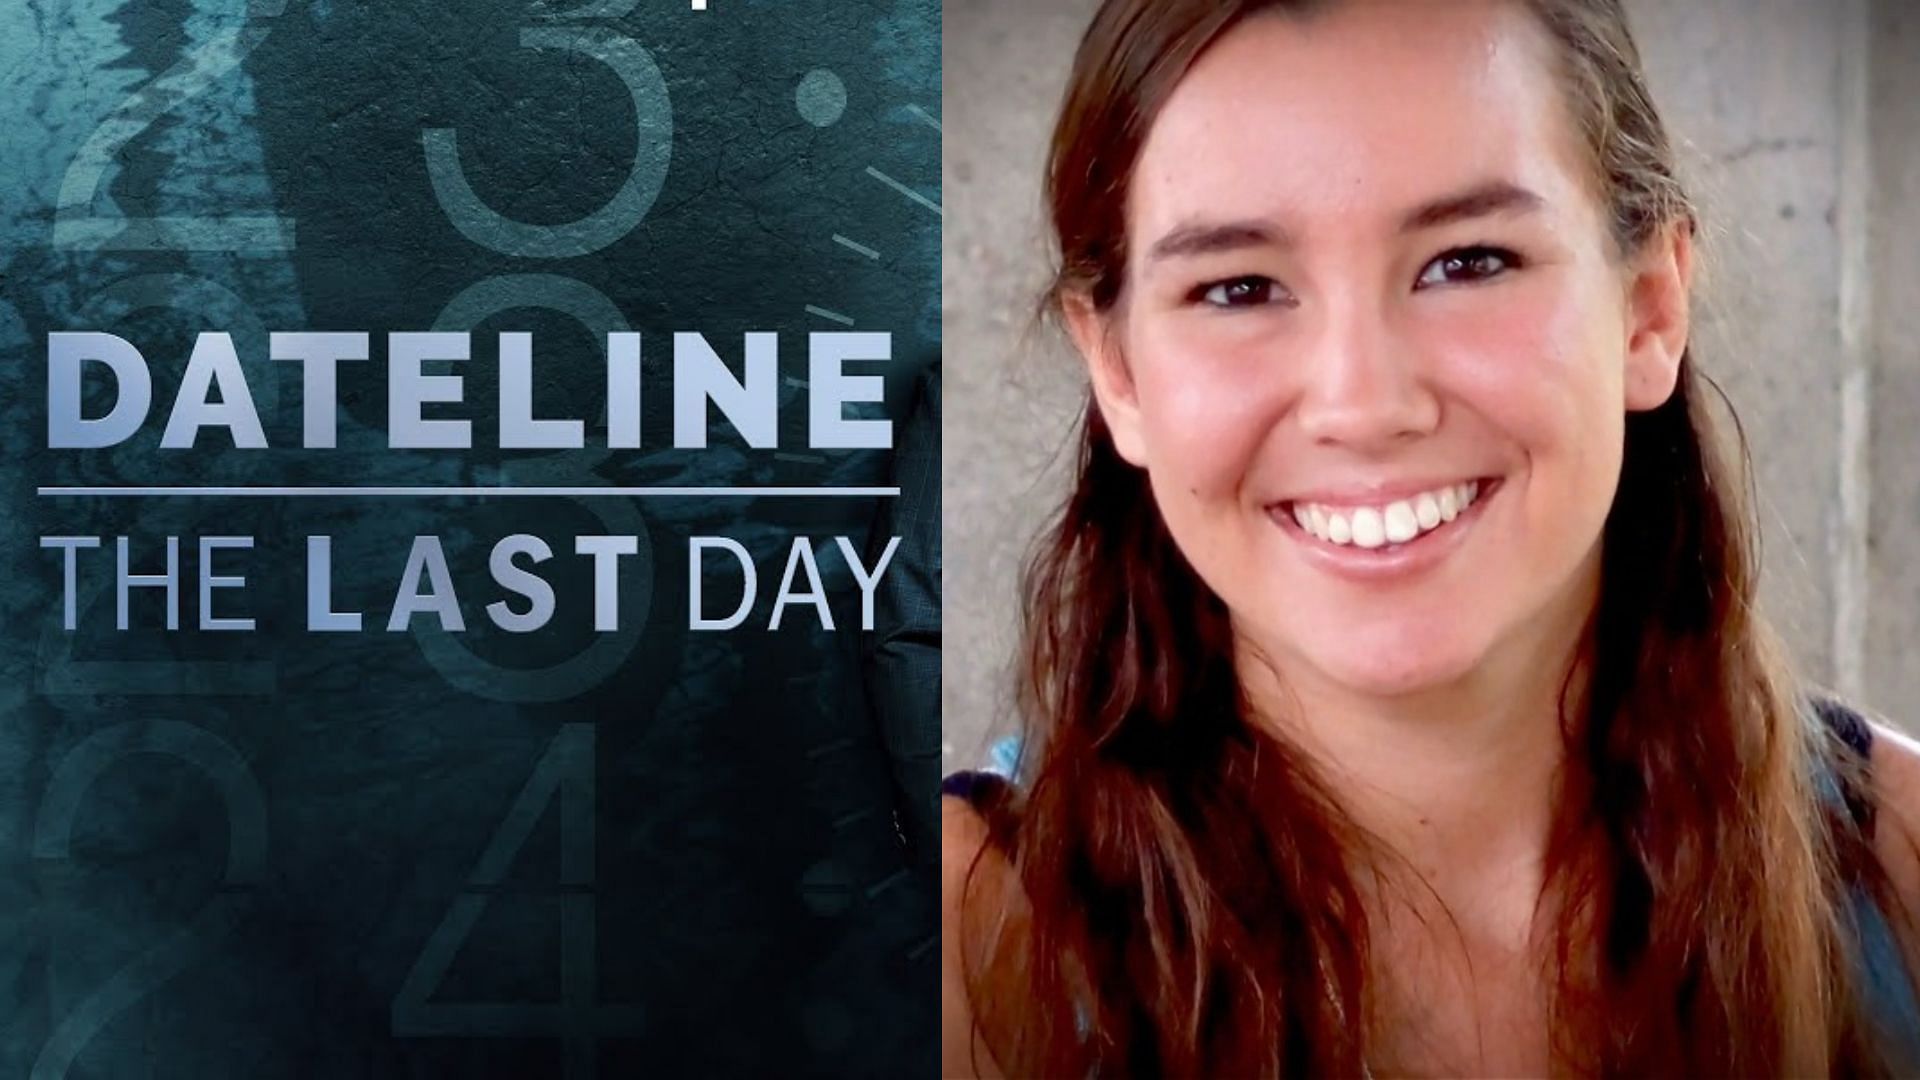 Dateline: The Last Day is all set to revisit the heartbreaking murder case of Mollie Tibbetts (Images Via YouTube/Google and Peacock/YouTube)